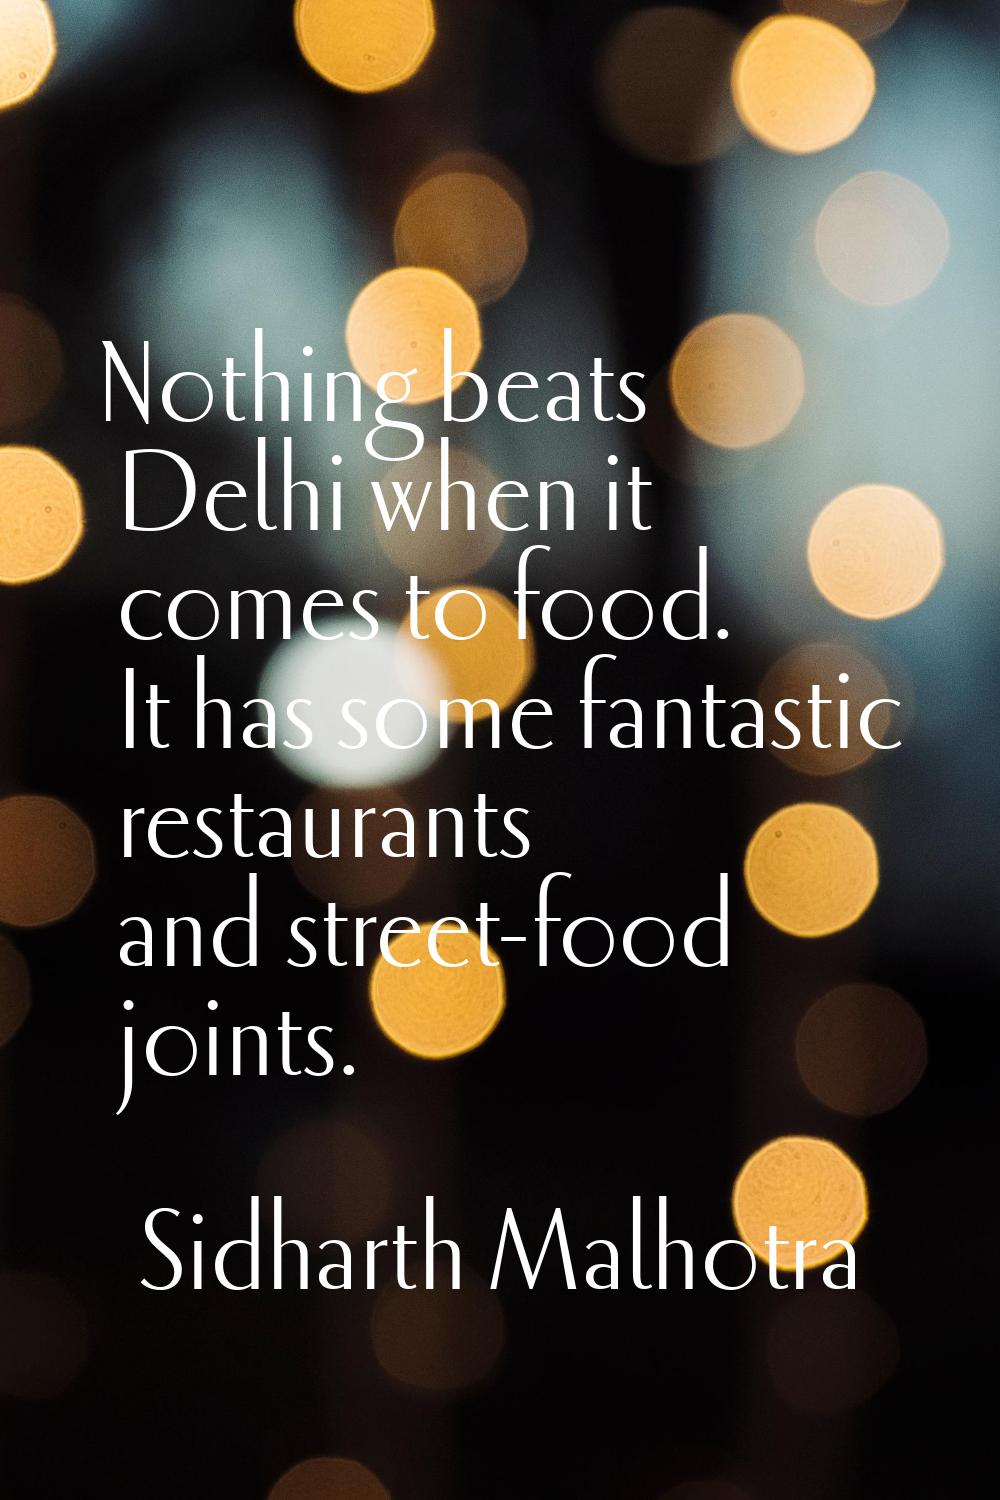 Nothing beats Delhi when it comes to food. It has some fantastic restaurants and street-food joints